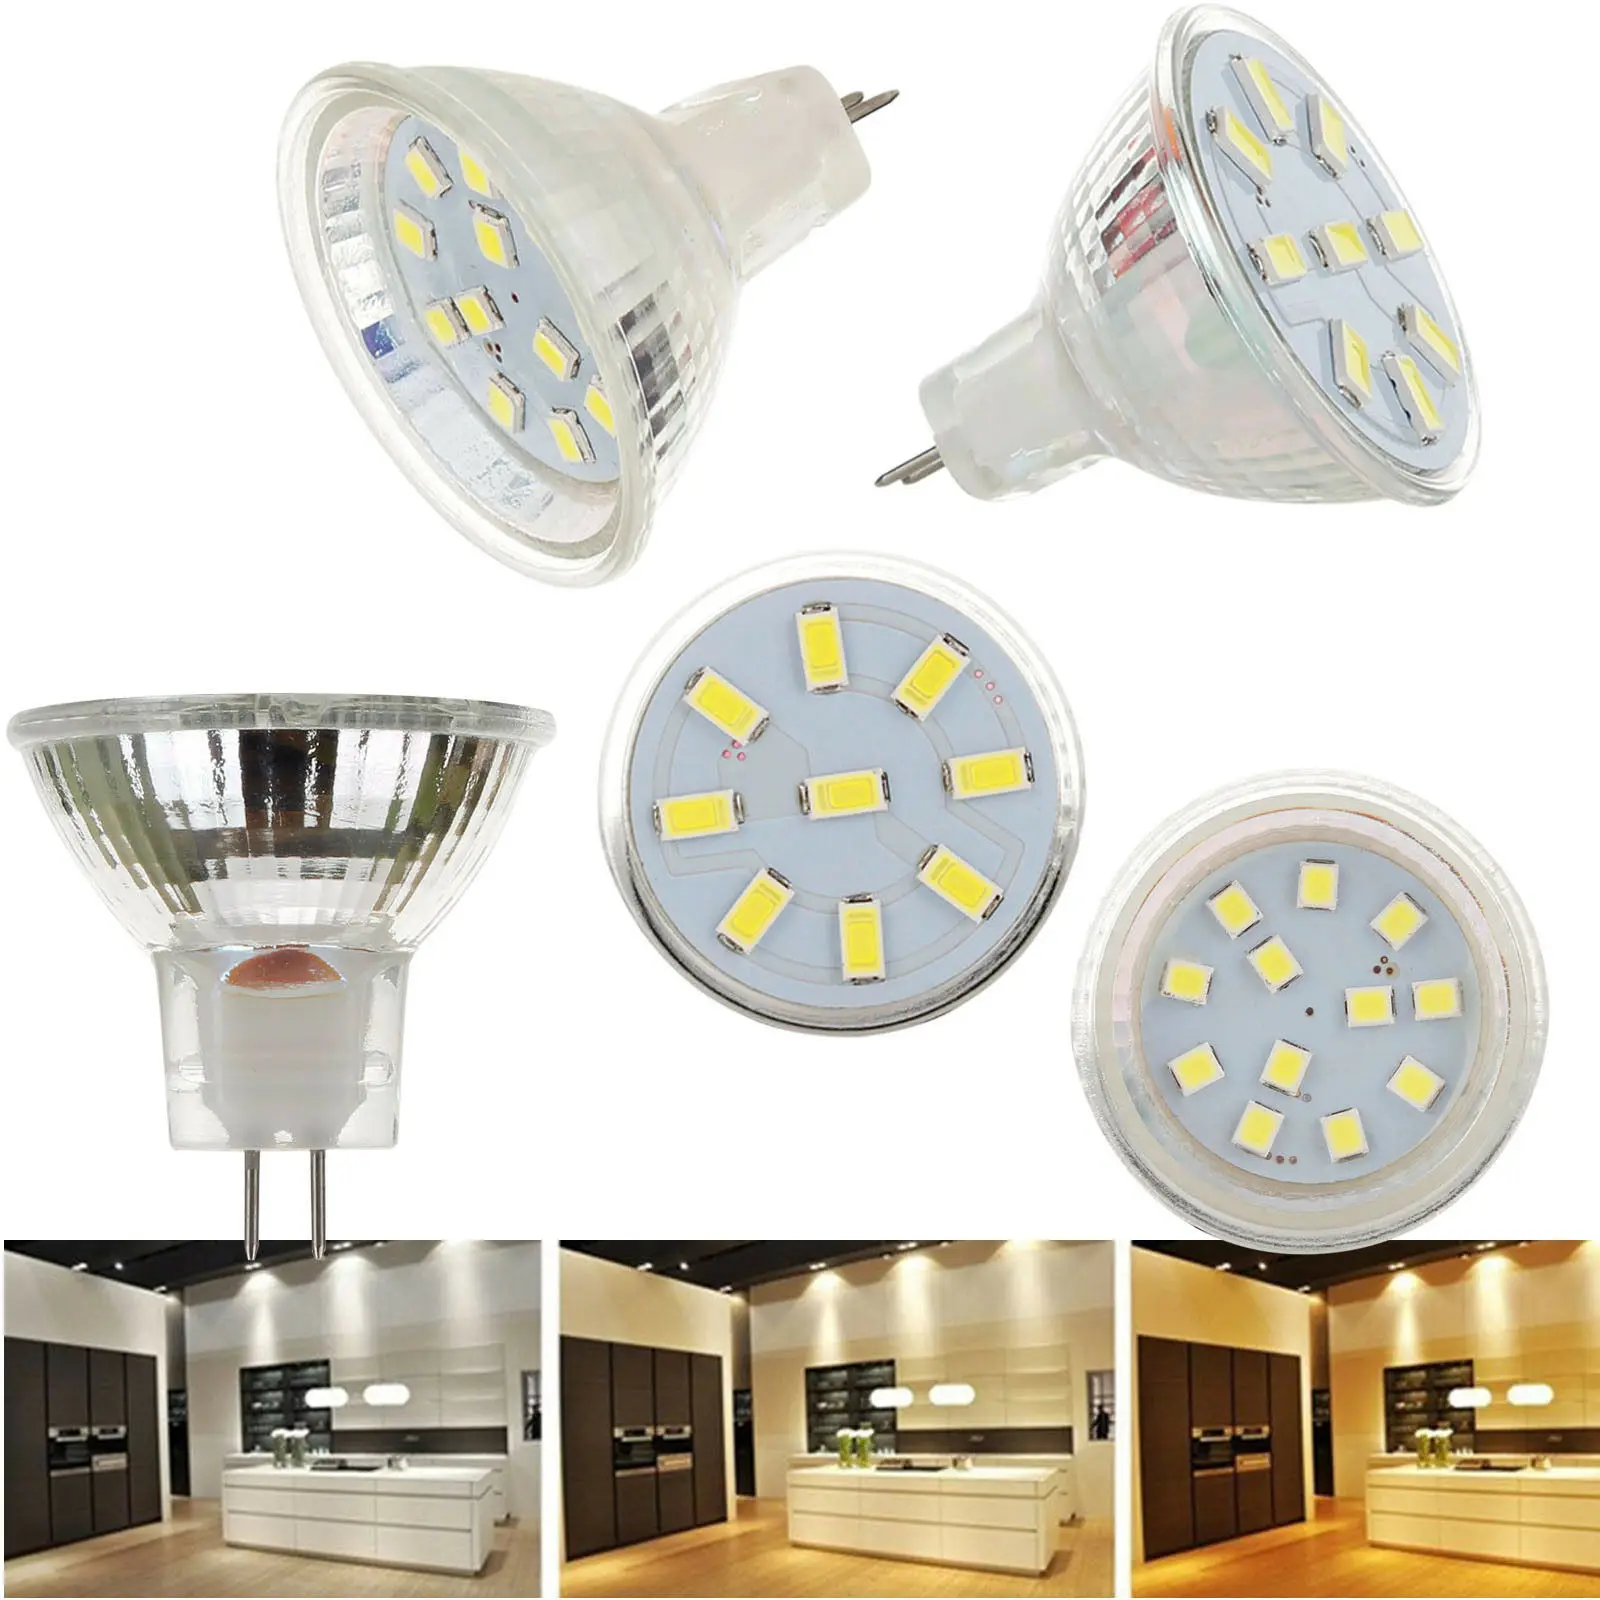 

MR11 GU4.0 LED Spotlight Bulbs AC/DC 12V 24V 5733/2835 SMD 2W 3W 4W Warm/Cold/Neutral White Lamp Replace Halogen Light 9-18 LEDs